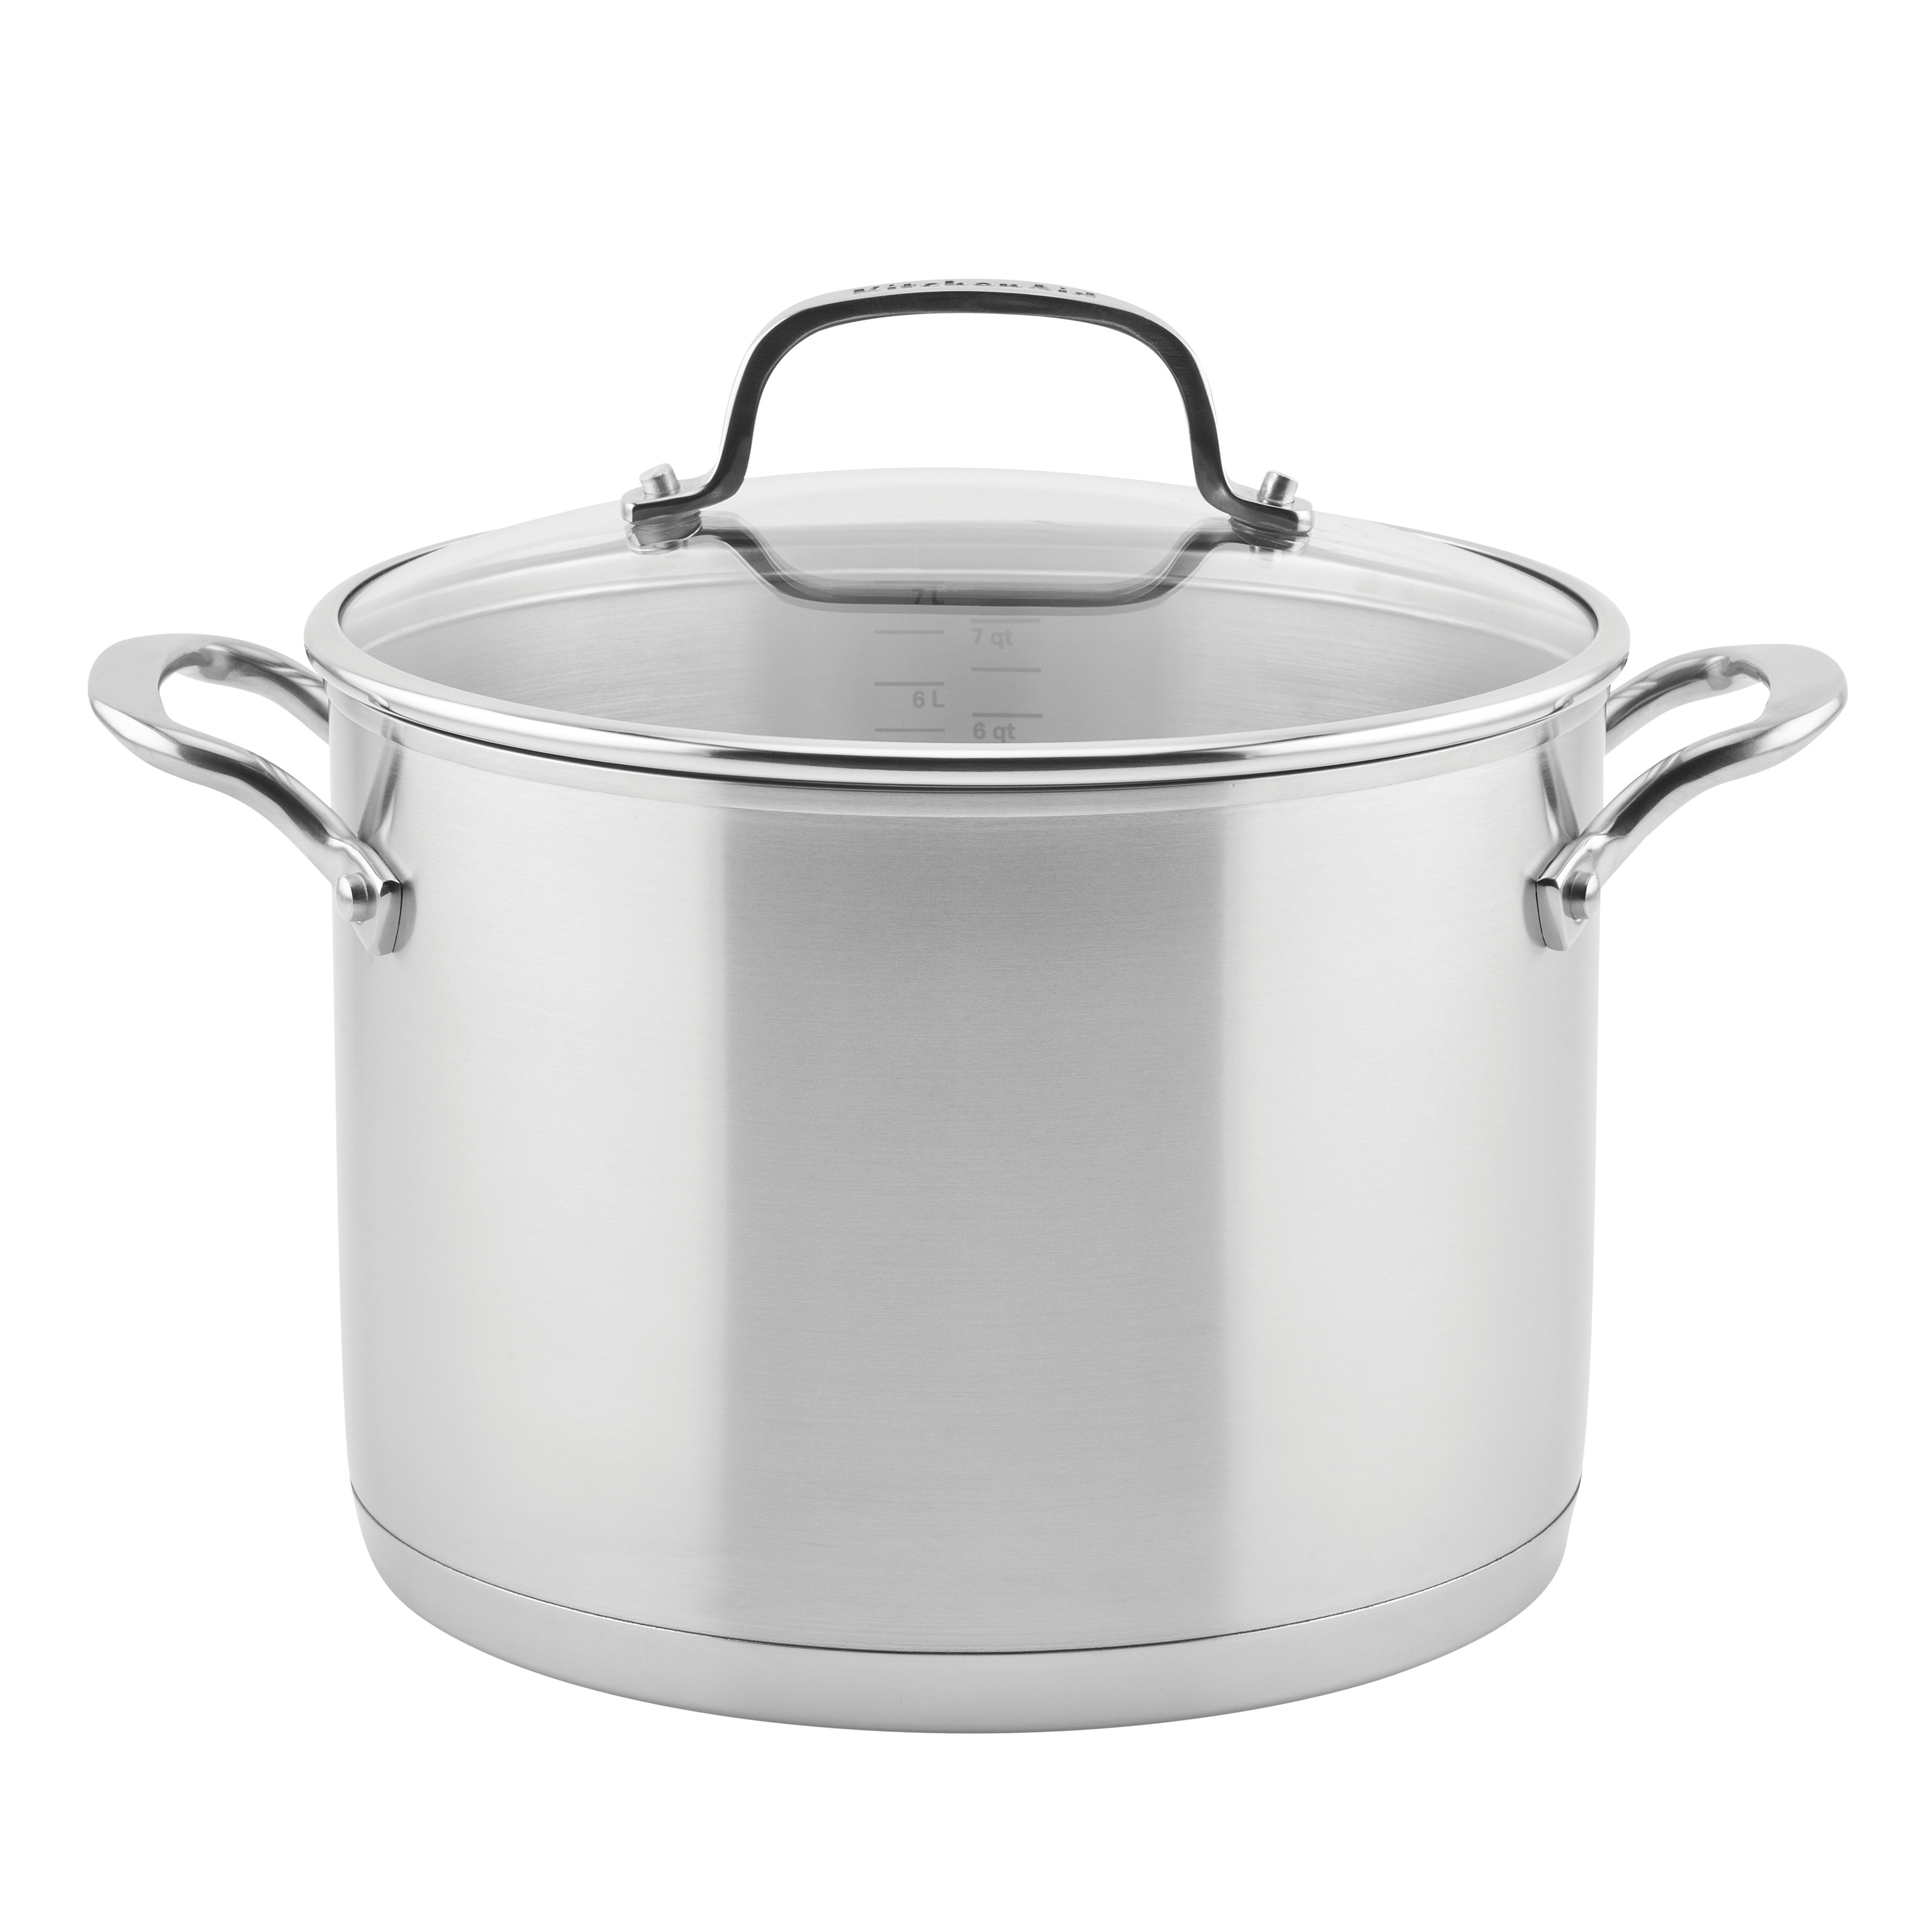 https://ak1.ostkcdn.com/images/products/is/images/direct/1d8acf111424e4e2d7adc2aa5e06d5cd4db20d35/KitchenAid-3-Ply-Base-Stainless-Steel-Stockpot-with-Lid%2C-8qt.jpg